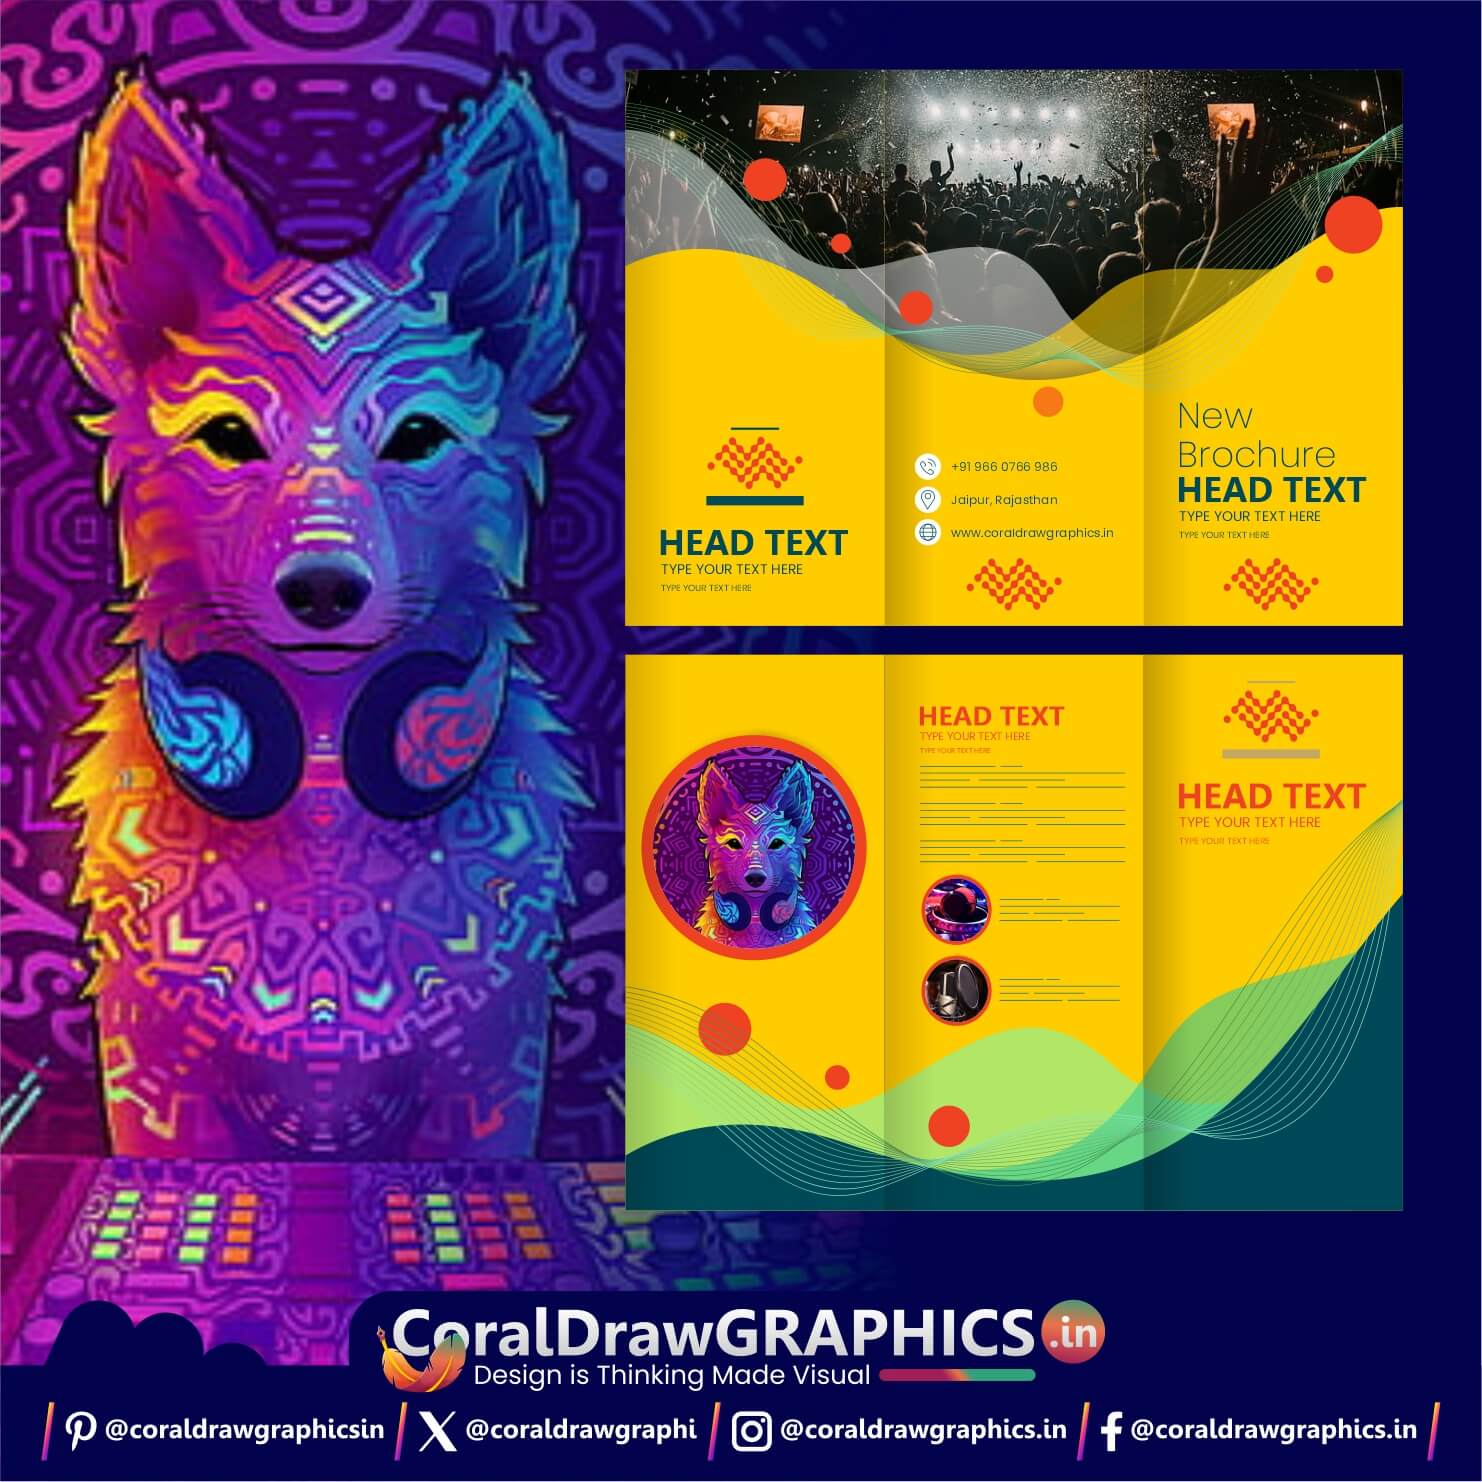 Three Fold, Corporate Brochure, templates, vibrant flyer design, eye-catching template, attention-grabbing colors, professional marketing material, visually appealing graphics, promotional tool, attractive layout, compelling visuals, standout flyer, colorful promotional material